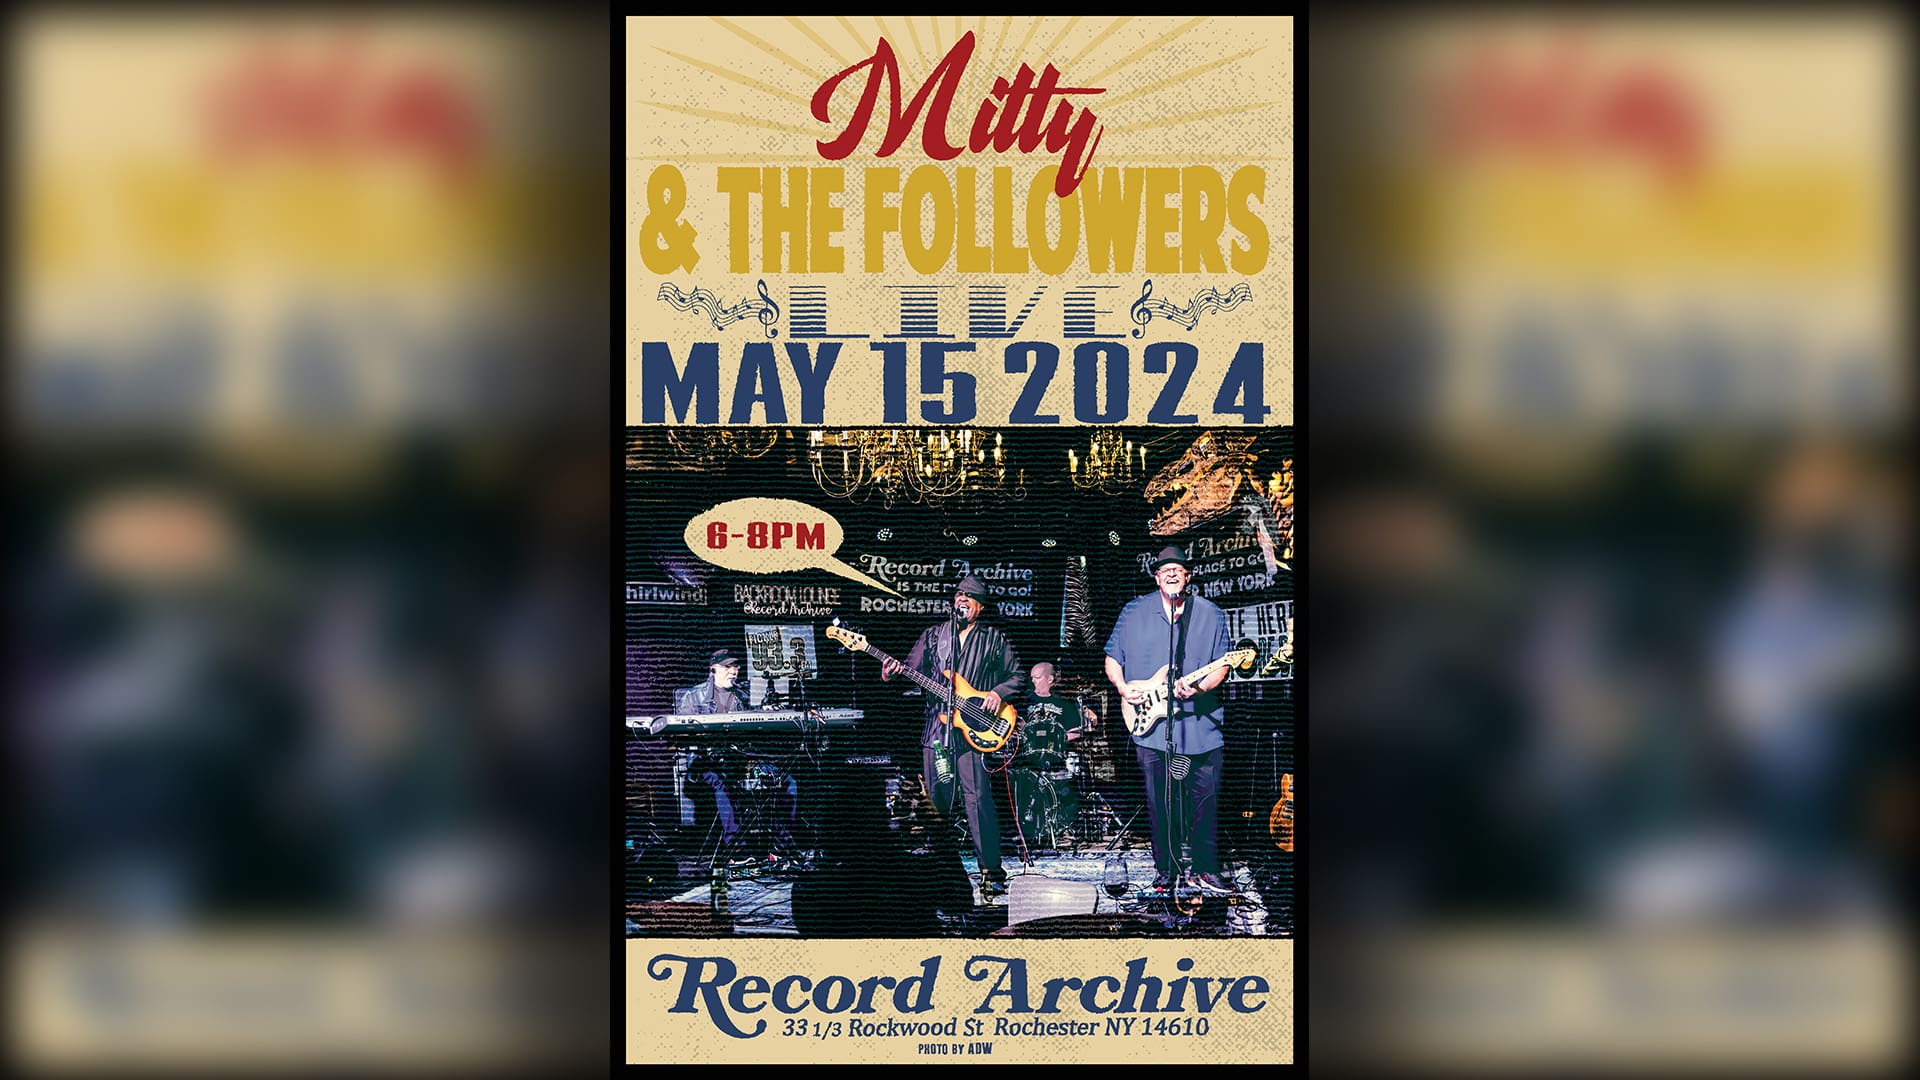 Mitty & The Followers. Live May 15 2024. 6-8pm. Record Archive 33 1/3 Rockwood St Rochester NY 14610. Photos by ADW. 